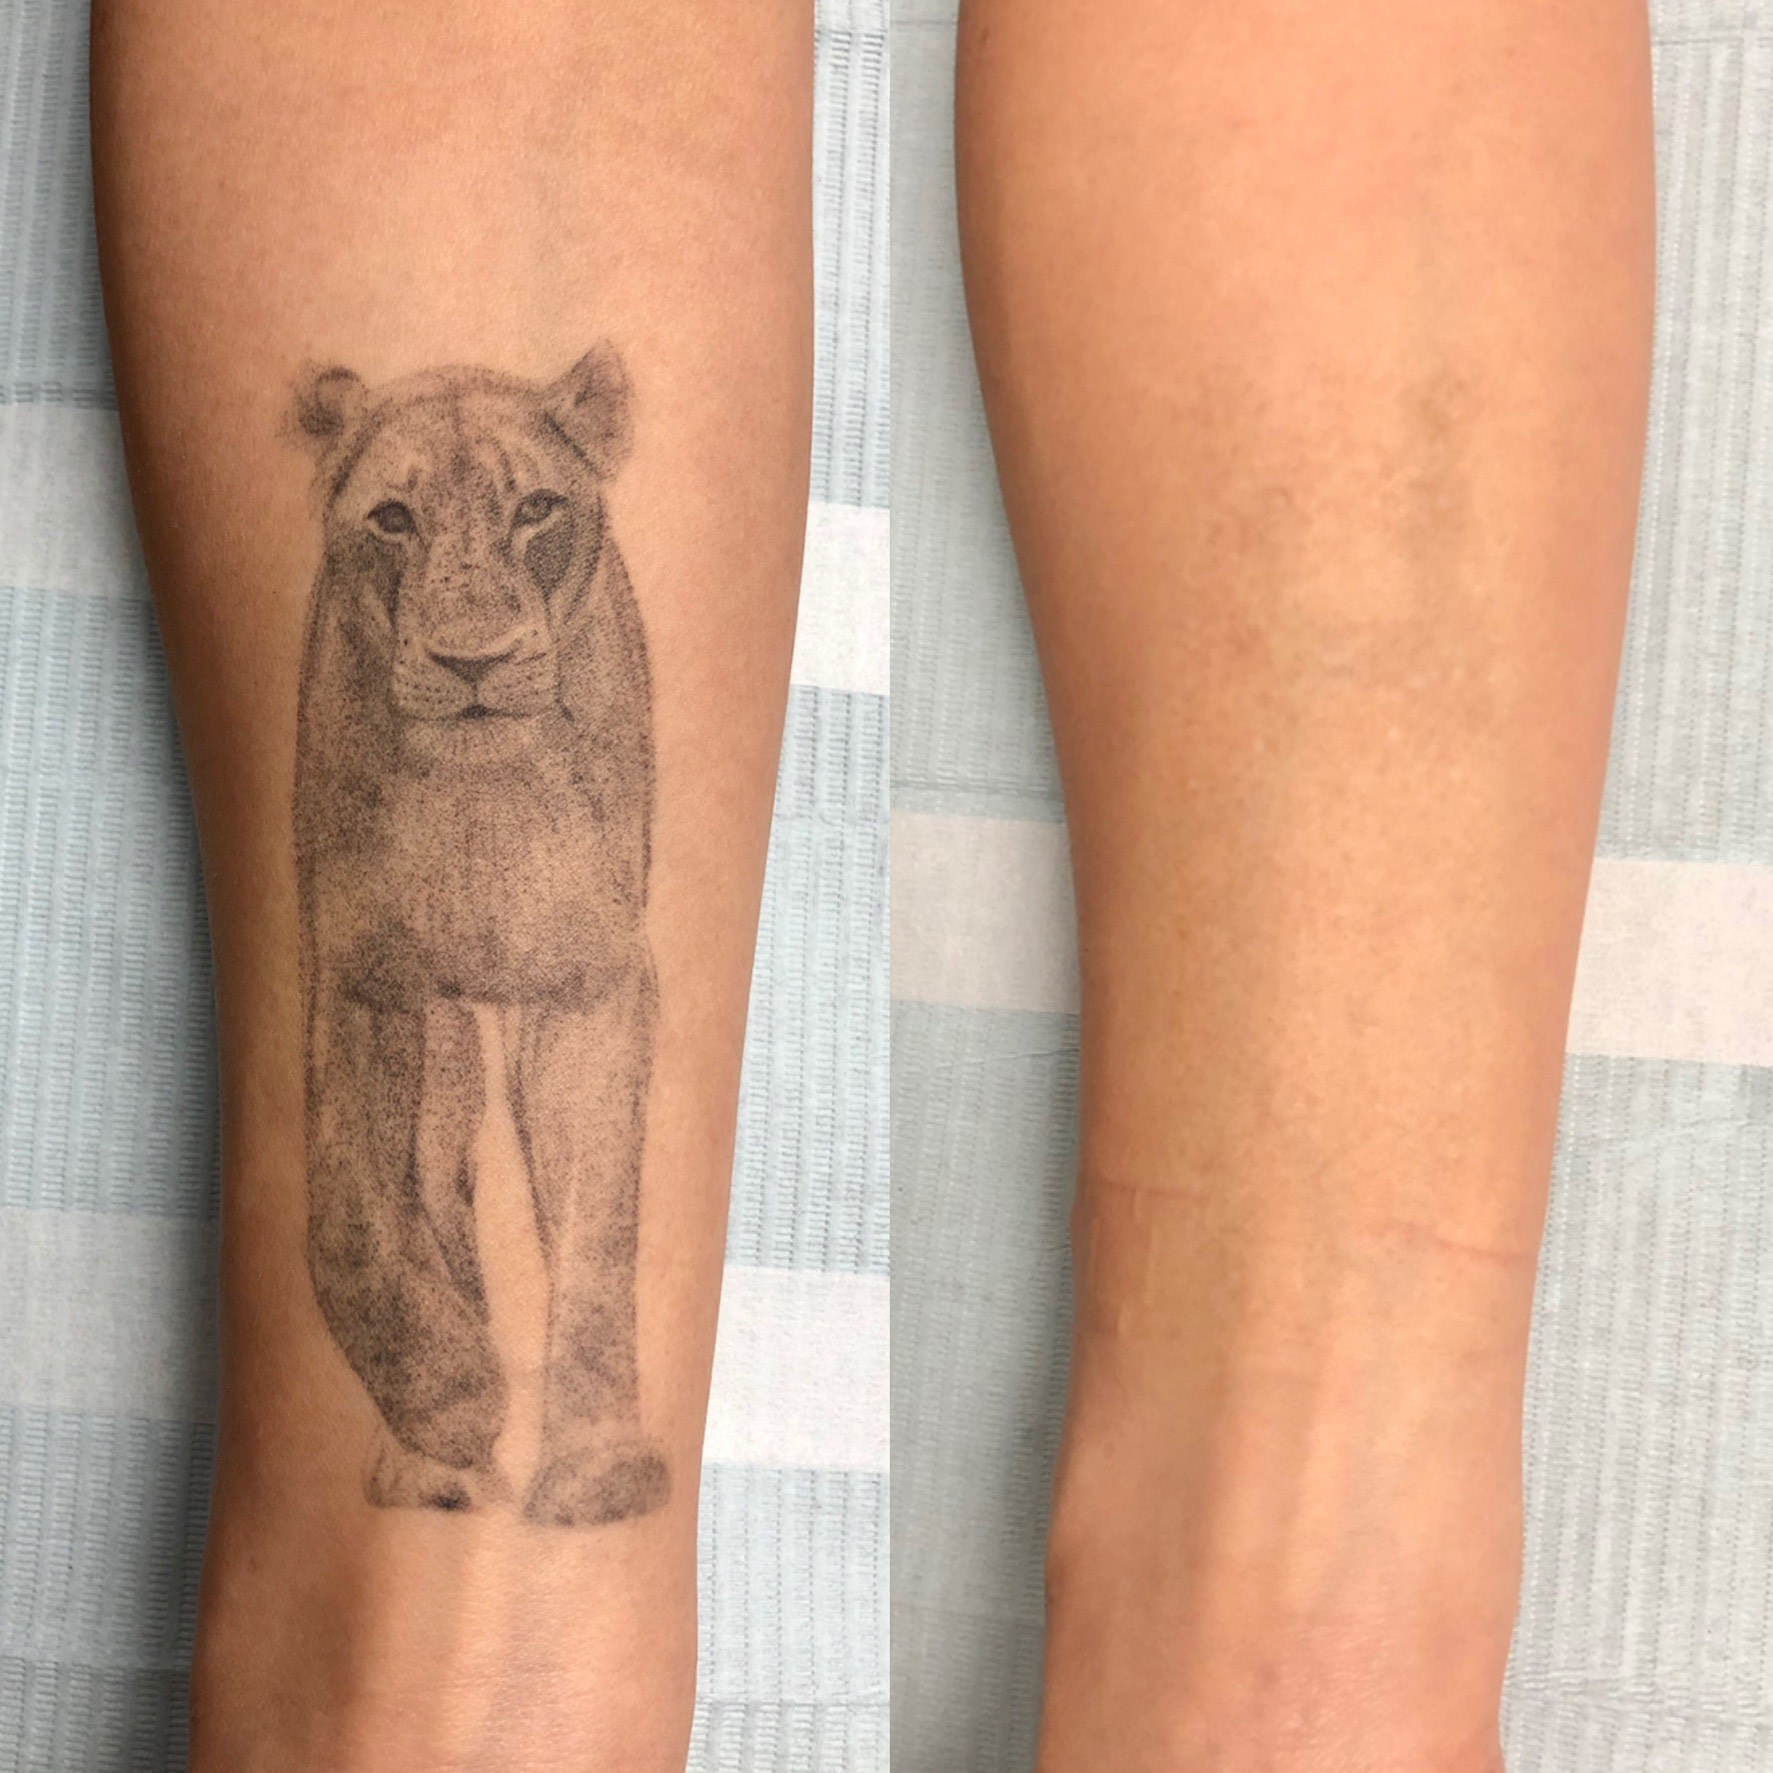 Does Laser Tattoo Removal leave Scars or Blisters Orange Coast  Aesthetics Cosmetic Specialists